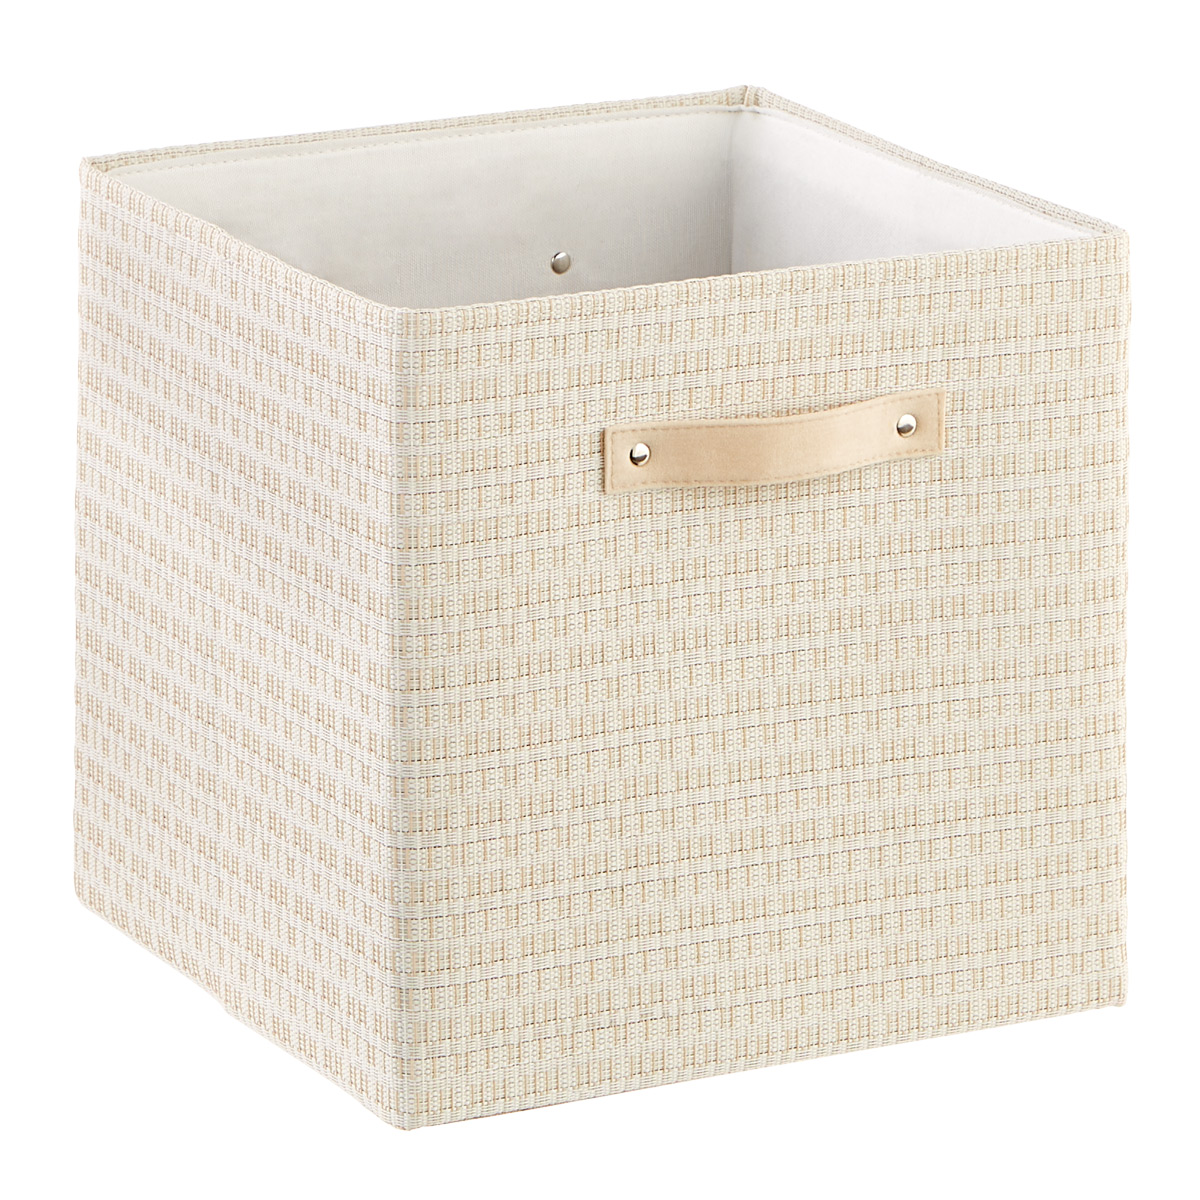 Woven Kiva Storage Cubes | The Container Store